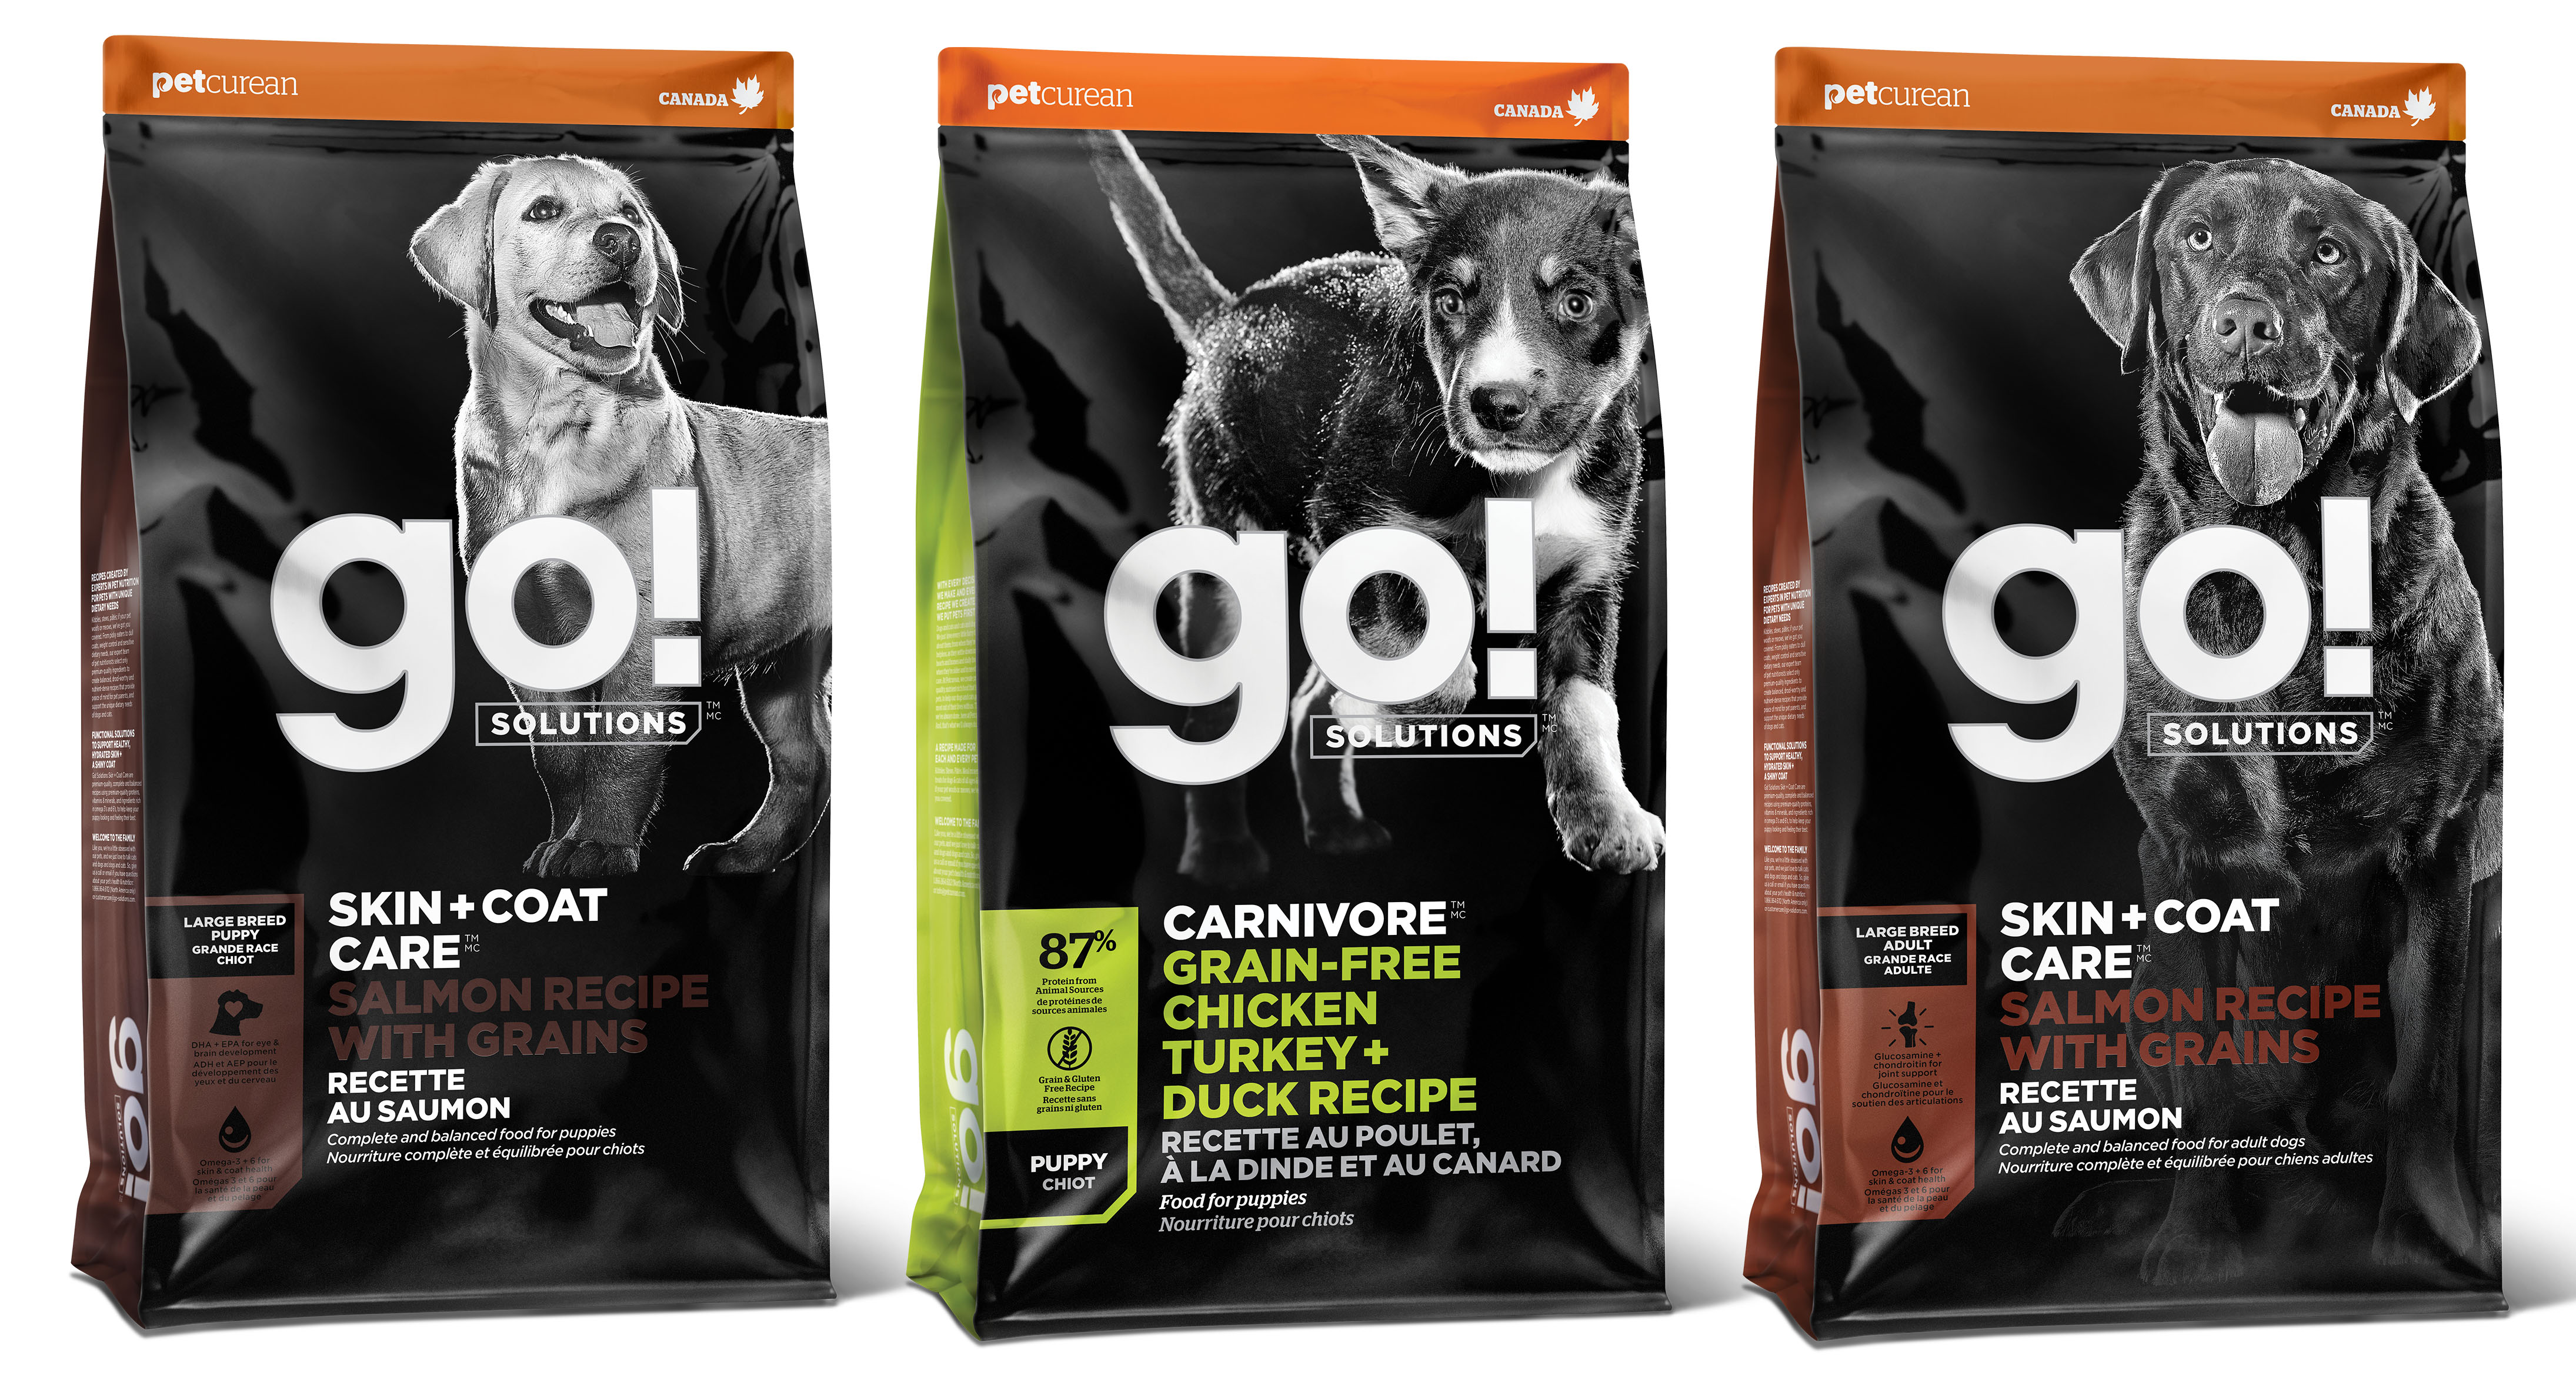 Petcurean’s GO! SOLUTIONS line includes formulas for puppies, large breed dogs and more